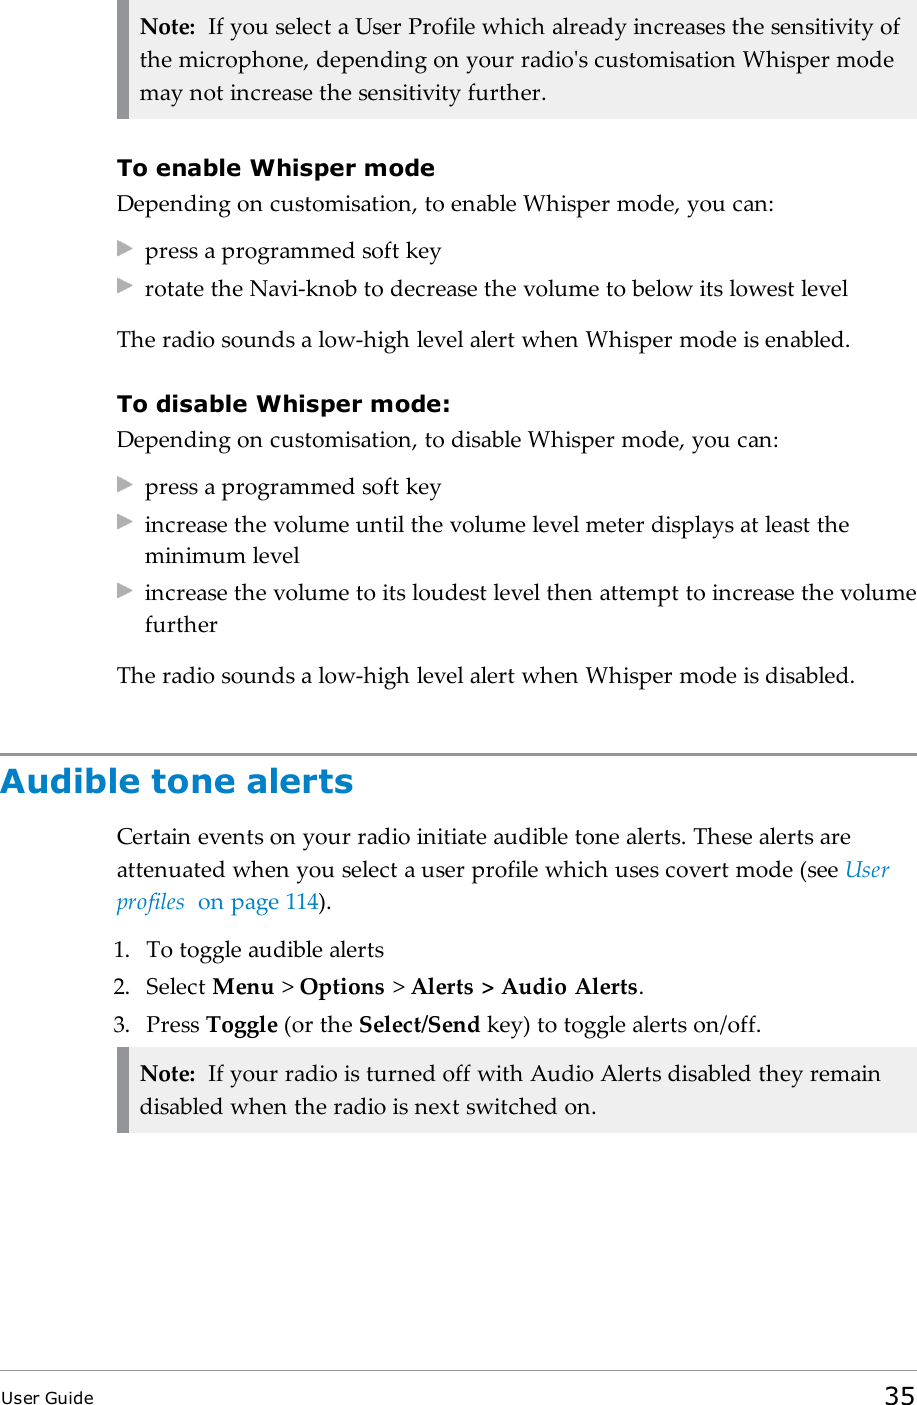 Note: If you select a User Profile which already increases the sensitivity ofthe microphone, depending on your radio&apos;s customisation Whisper modemay not increase the sensitivity further.To enable Whisper modeDepending on customisation, to enable Whisper mode, you can:press a programmed soft keyrotate the Navi-knob to decrease the volume to below its lowest levelThe radio sounds a low-high level alert when Whisper mode is enabled.To disable Whisper mode:Depending on customisation, to disable Whisper mode, you can:press a programmed soft keyincrease the volume until the volume level meter displays at least theminimum levelincrease the volume to its loudest level then attempt to increase the volumefurtherThe radio sounds a low-high level alert when Whisper mode is disabled.Audible tone alertsCertain events on your radio initiate audible tone alerts. These alerts areattenuated when you select a user profile which uses covert mode (see Userprofiles on page114).1. To toggle audible alerts2. Select Menu &gt;Options &gt;Alerts &gt; Audio Alerts.3. Press Toggle (or the Select/Send key) to toggle alerts on/off.Note: If your radio is turned off with Audio Alerts disabled they remaindisabled when the radio is next switched on.User Guide 35